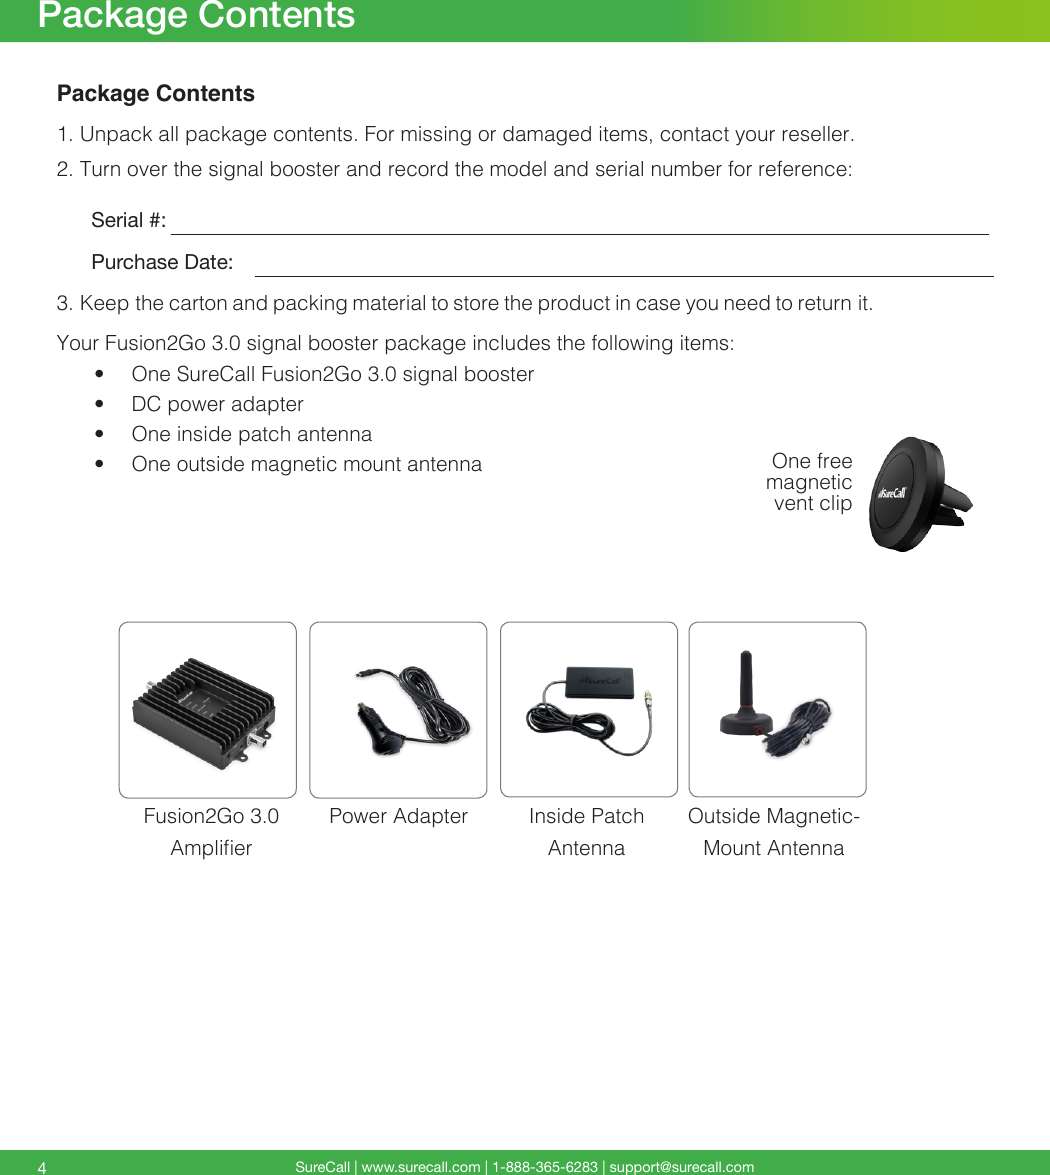 SureCall | www.surecall.com | 1-888-365-6283 | support@surecall.com4Package ContentsPackage Contents1. Unpack all package contents. For missing or damaged items, contact your reseller.2. Turn over the signal booster and record the model and serial number for reference:      Serial #:          Purchase Date:  3. Keep the carton and packing material to store the product in case you need to return it. Your Fusion2Go 3.0 signal booster package includes the following items:•  One SureCall Fusion2Go 3.0 signal booster•  DC power adapter•  One inside patch antenna•  One outside magnetic mount antennaFusion2Go 3.0  AmplierInside Patch  AntennaPower Adapter Outside Magnetic-Mount AntennaOne free magnetic vent clip